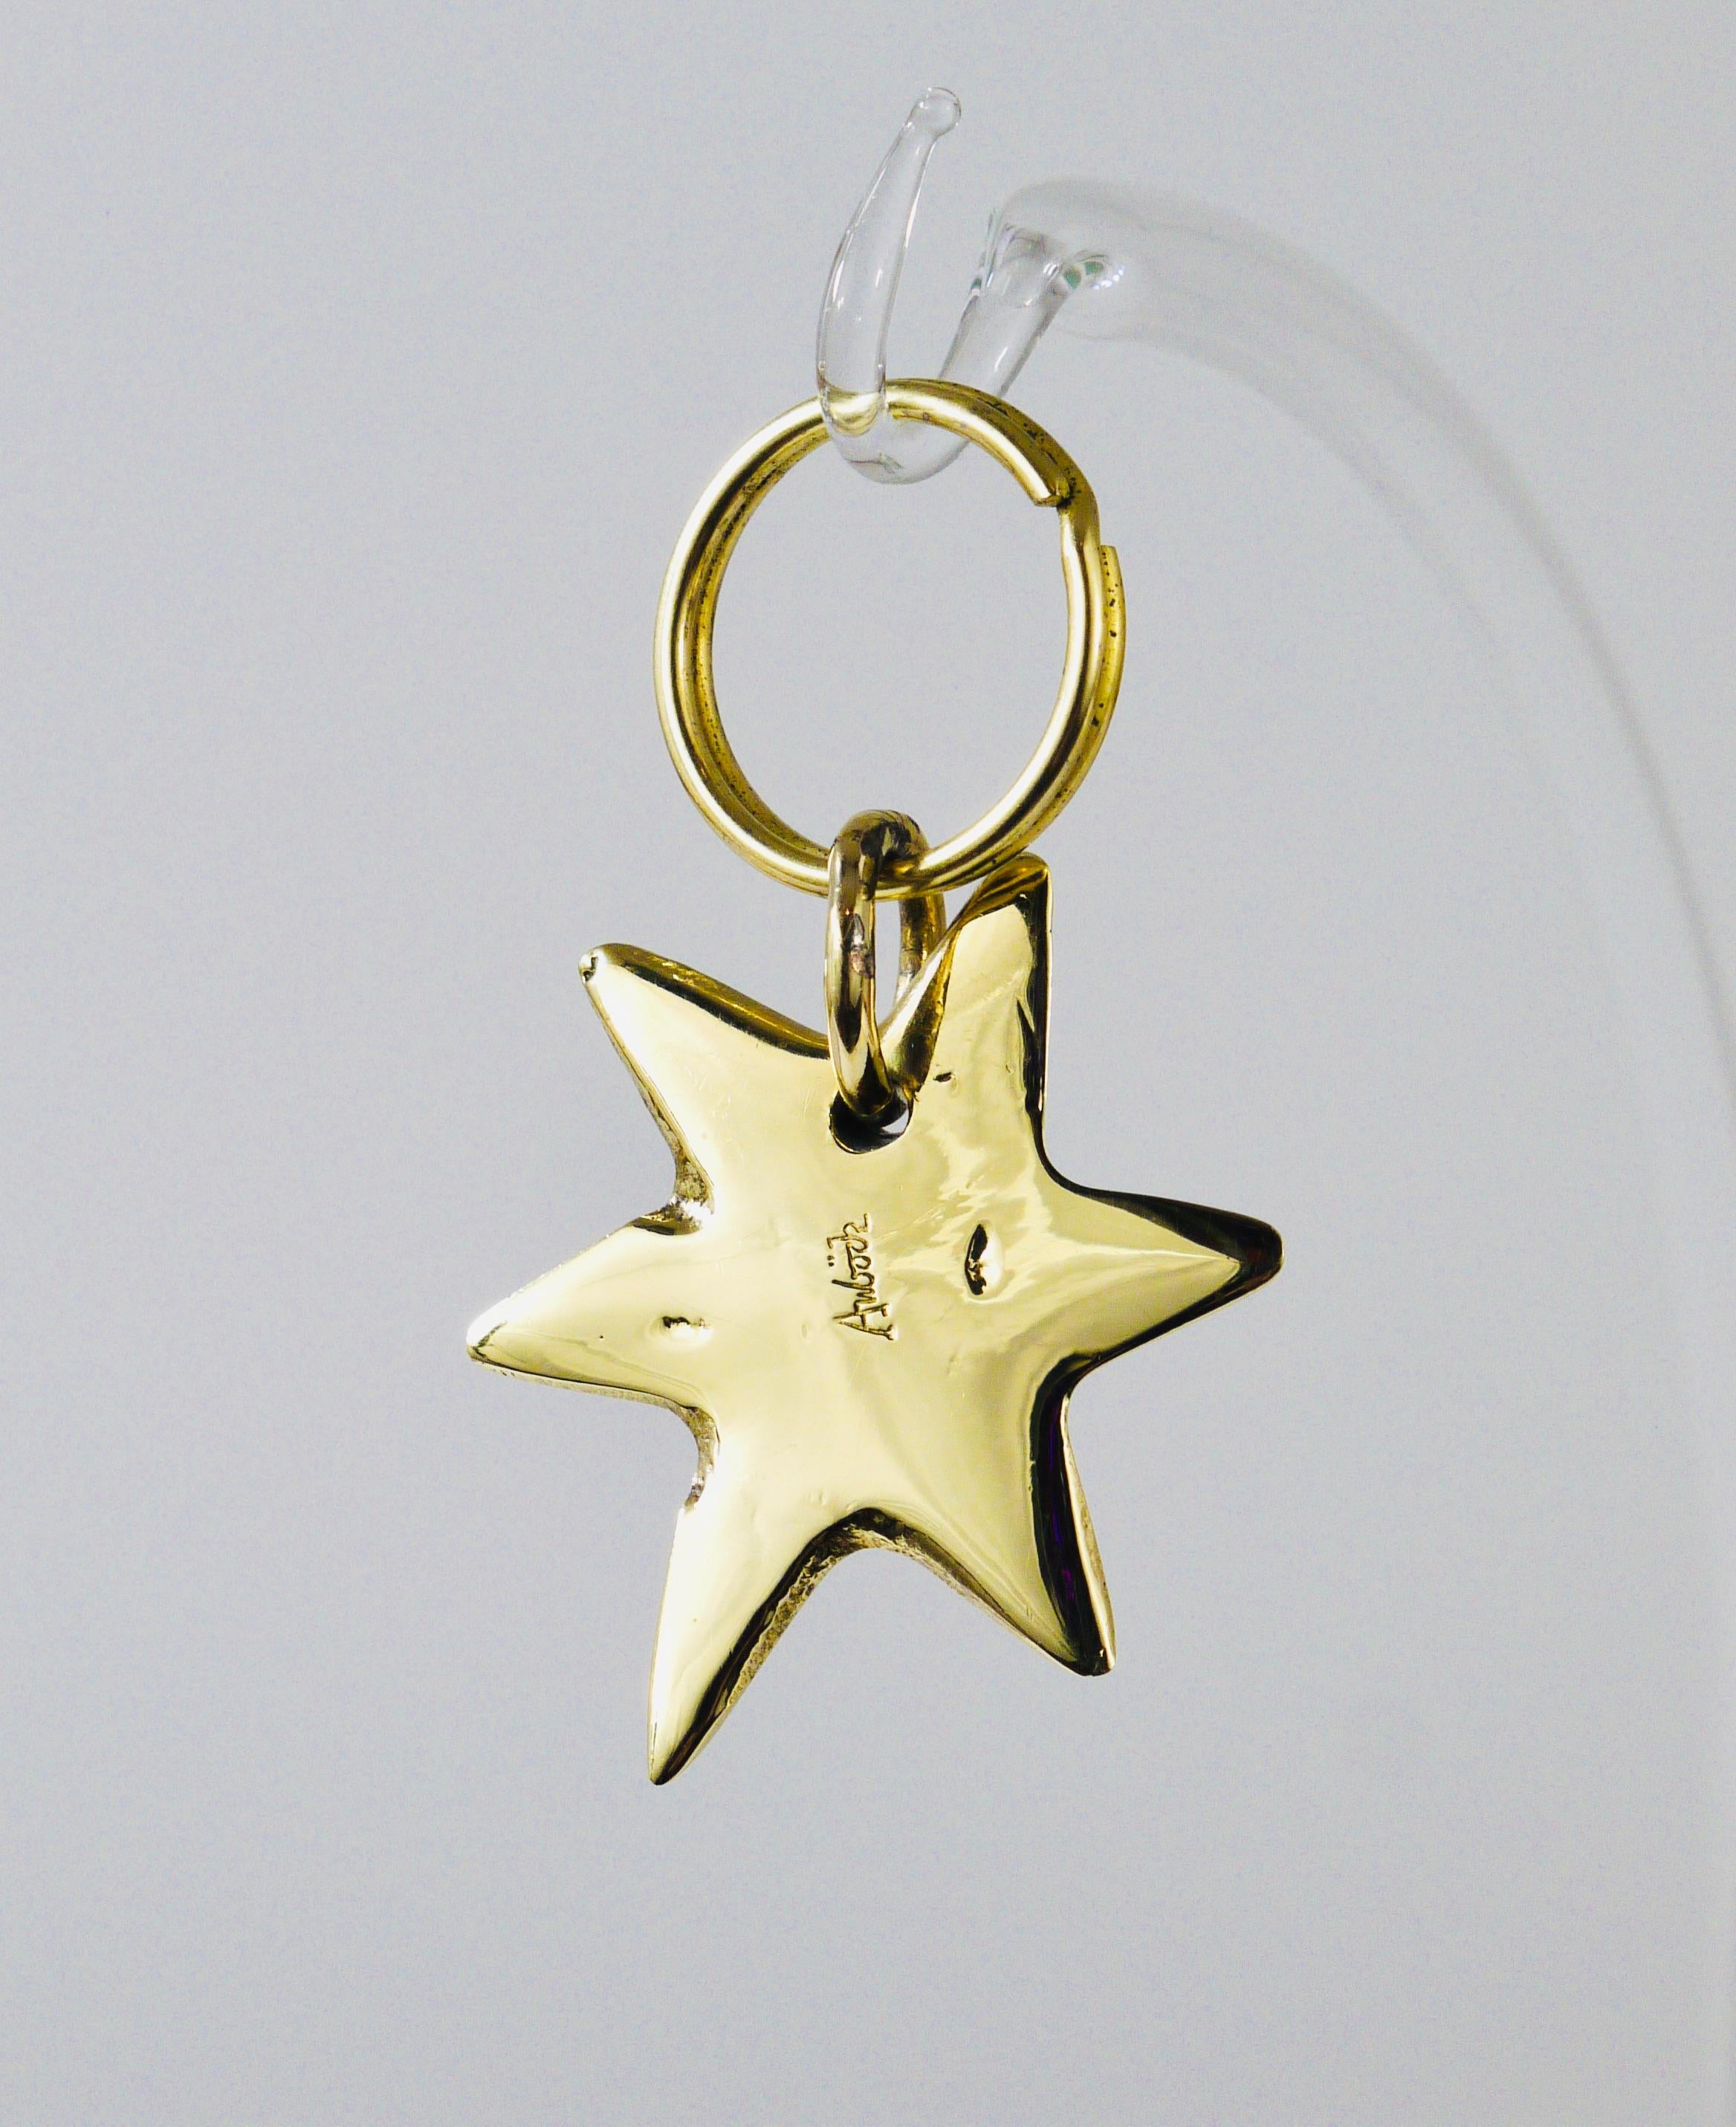 Carl Auböck Midcentury Brass Star Sea Star Starfish Key Ring Chain Holder In Excellent Condition For Sale In Vienna, AT